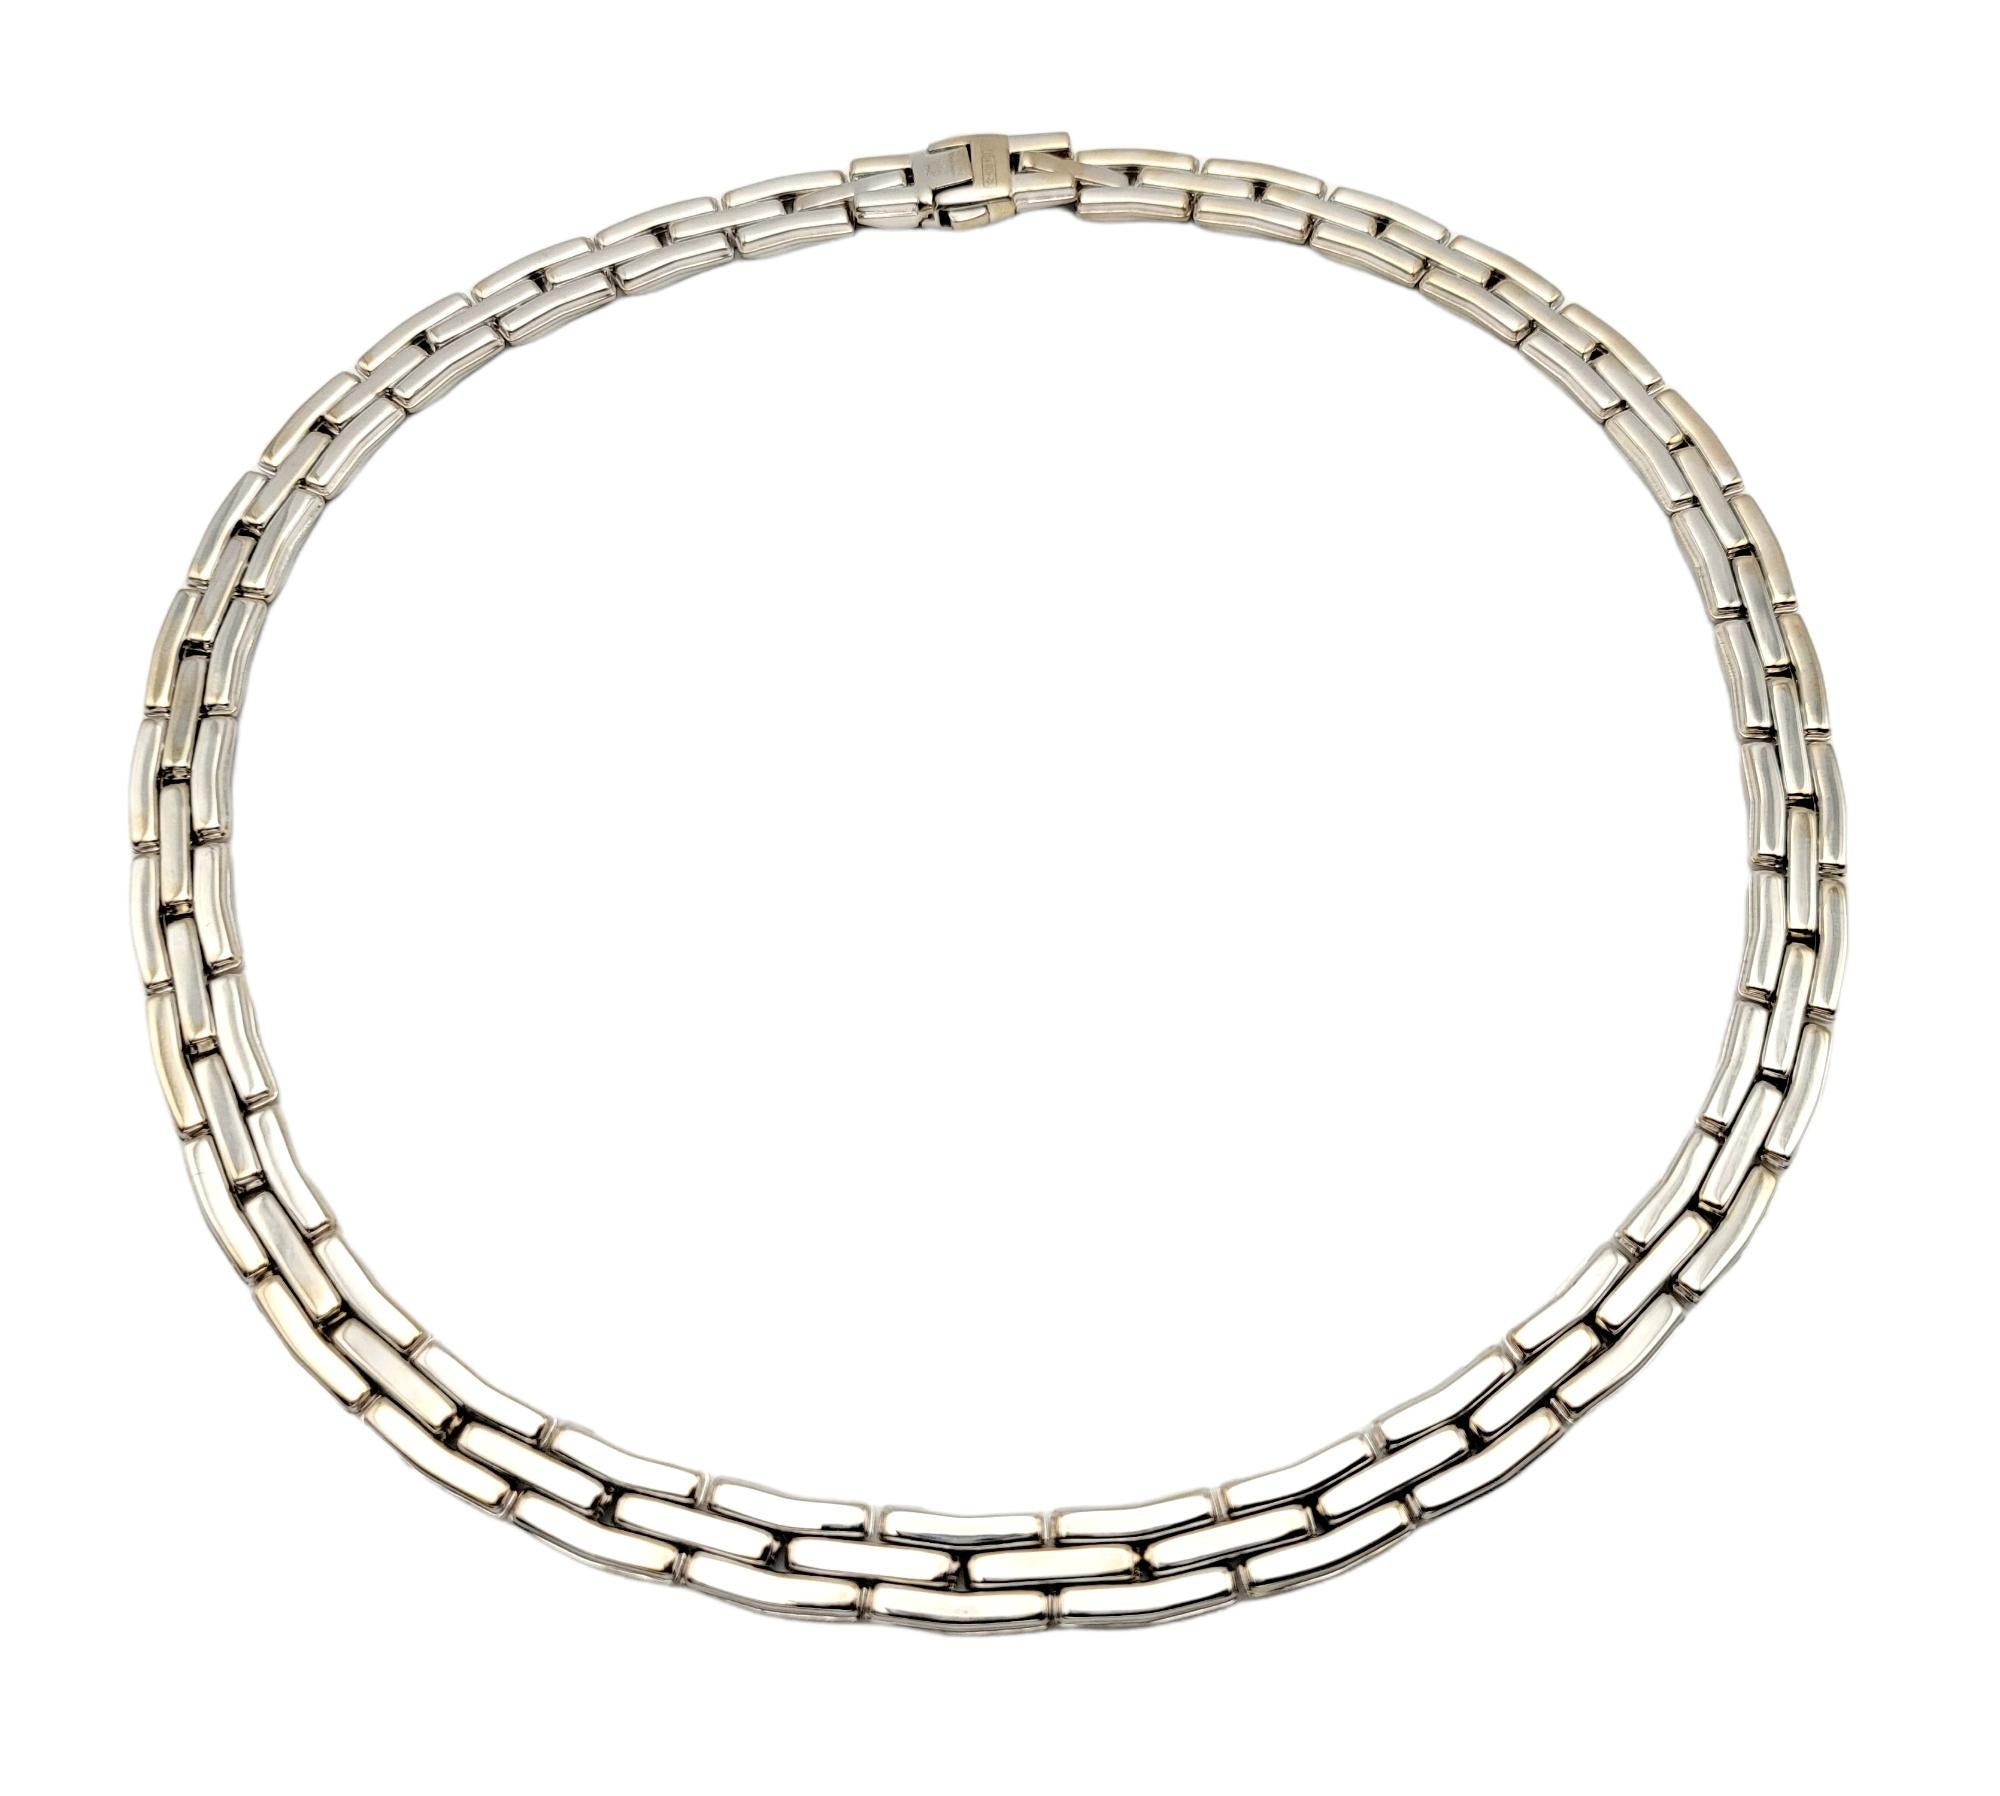 You will absolutely love this strikingly beautiful minimalist necklace by Chimento. It is stunningly simple in design, with curved lines and glittering pave diamonds, making the piece absolutely glow! This lovely necklace features three rows of